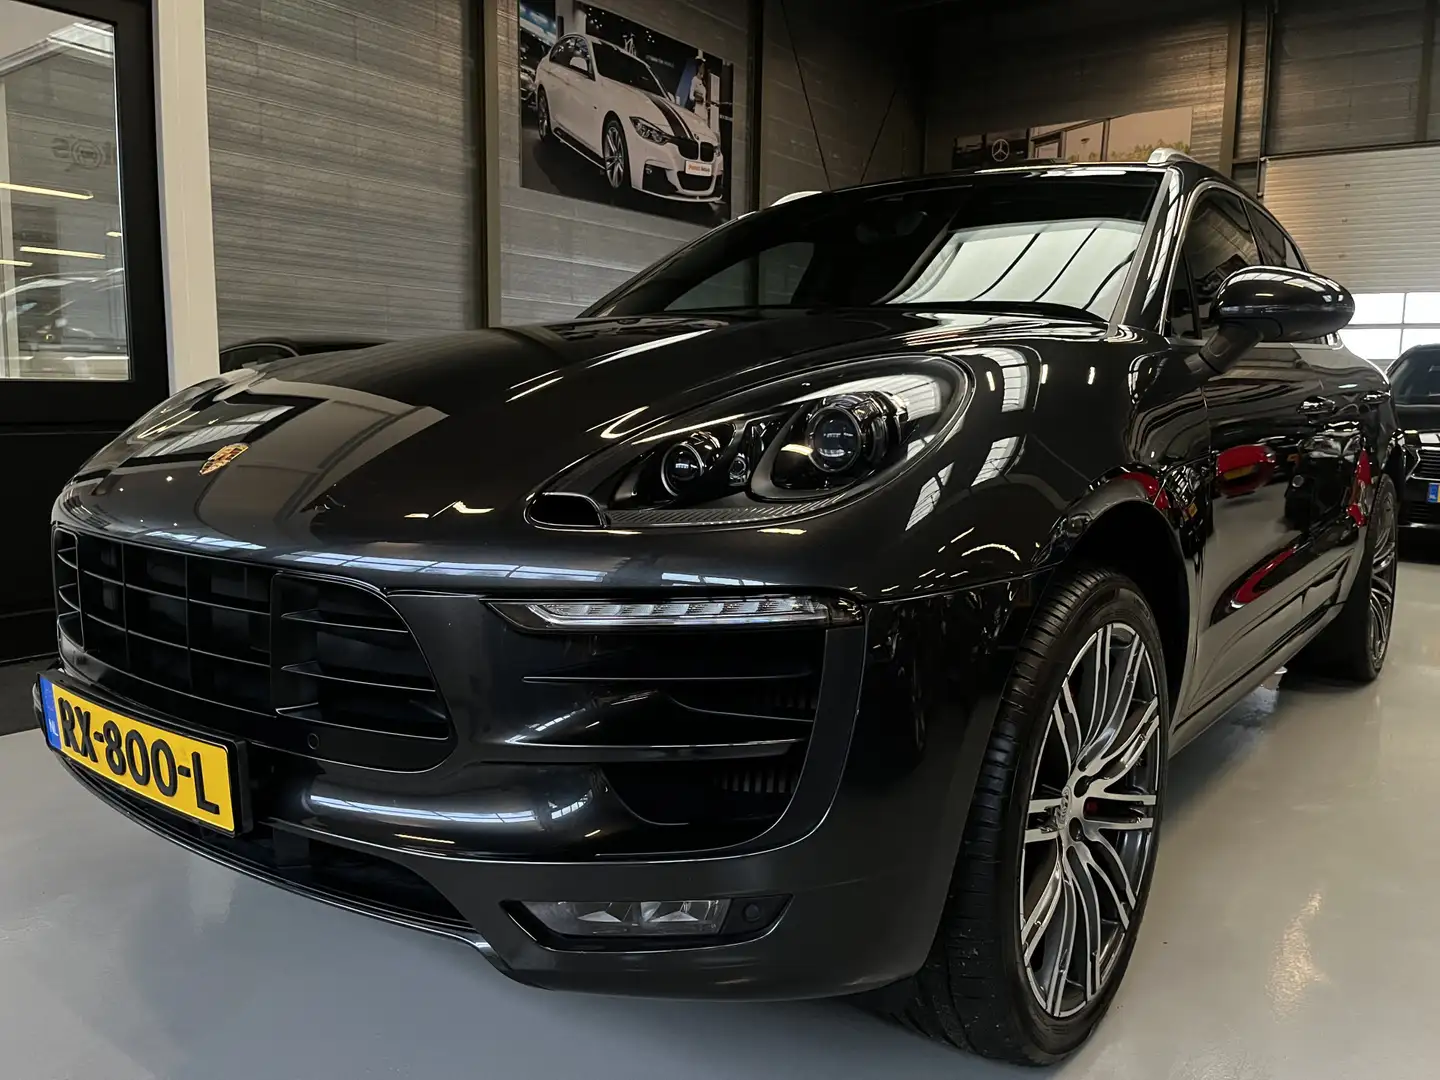 Porsche Macan 3.6 Turbo 21inch, Pano, Luchtvering, Bose siva - 2